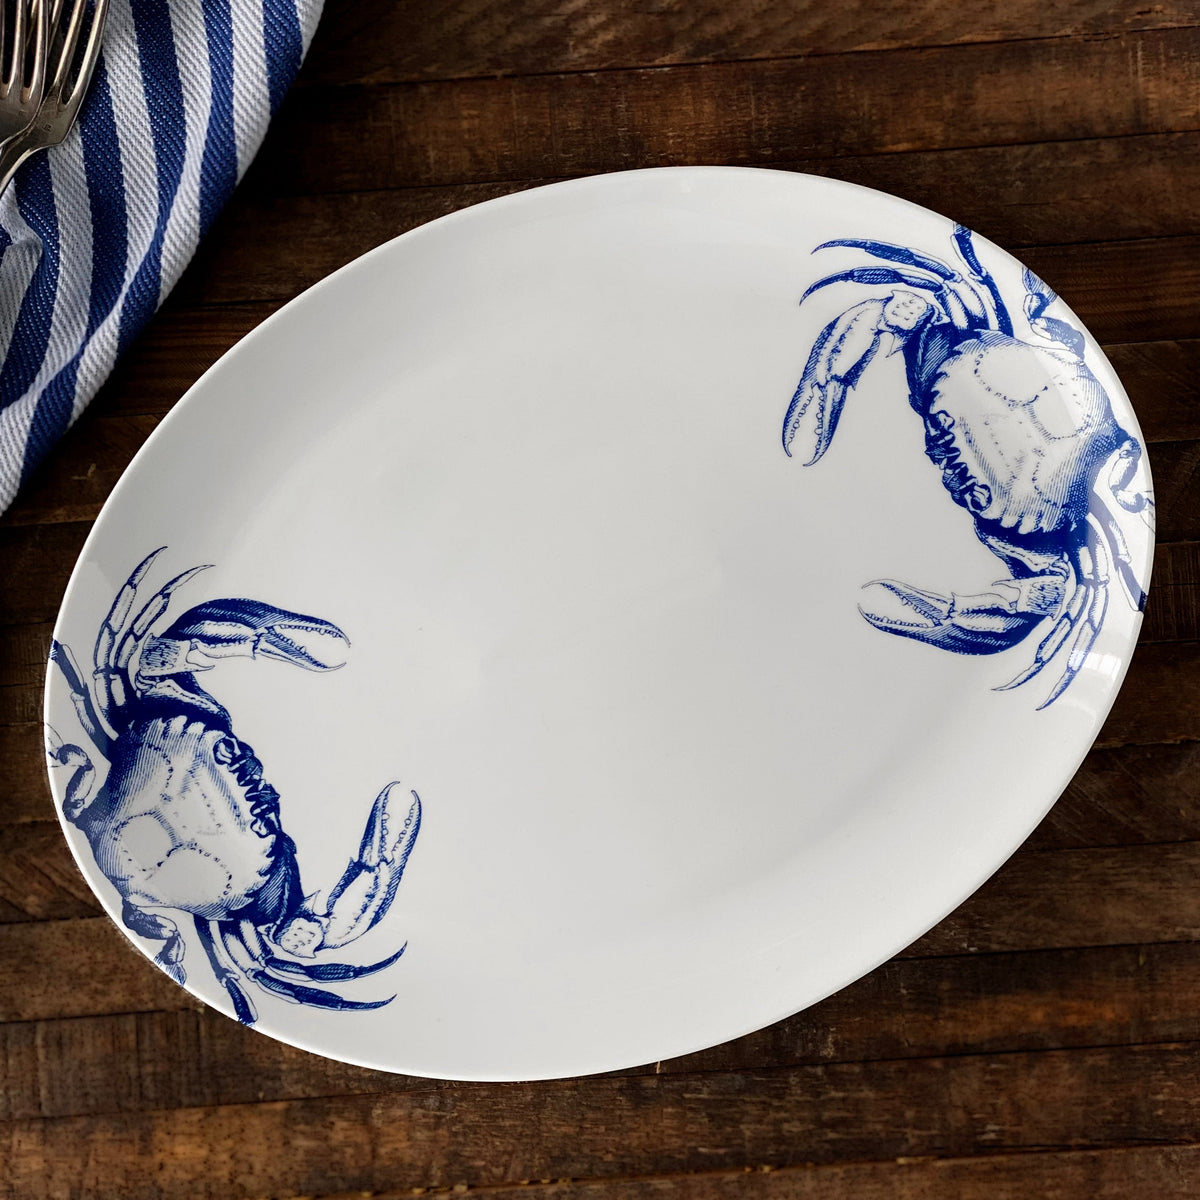 A Crab Coupe Oval Platter with a crab on it, perfect for coastal style decor, made by Caskata Artisanal Home.